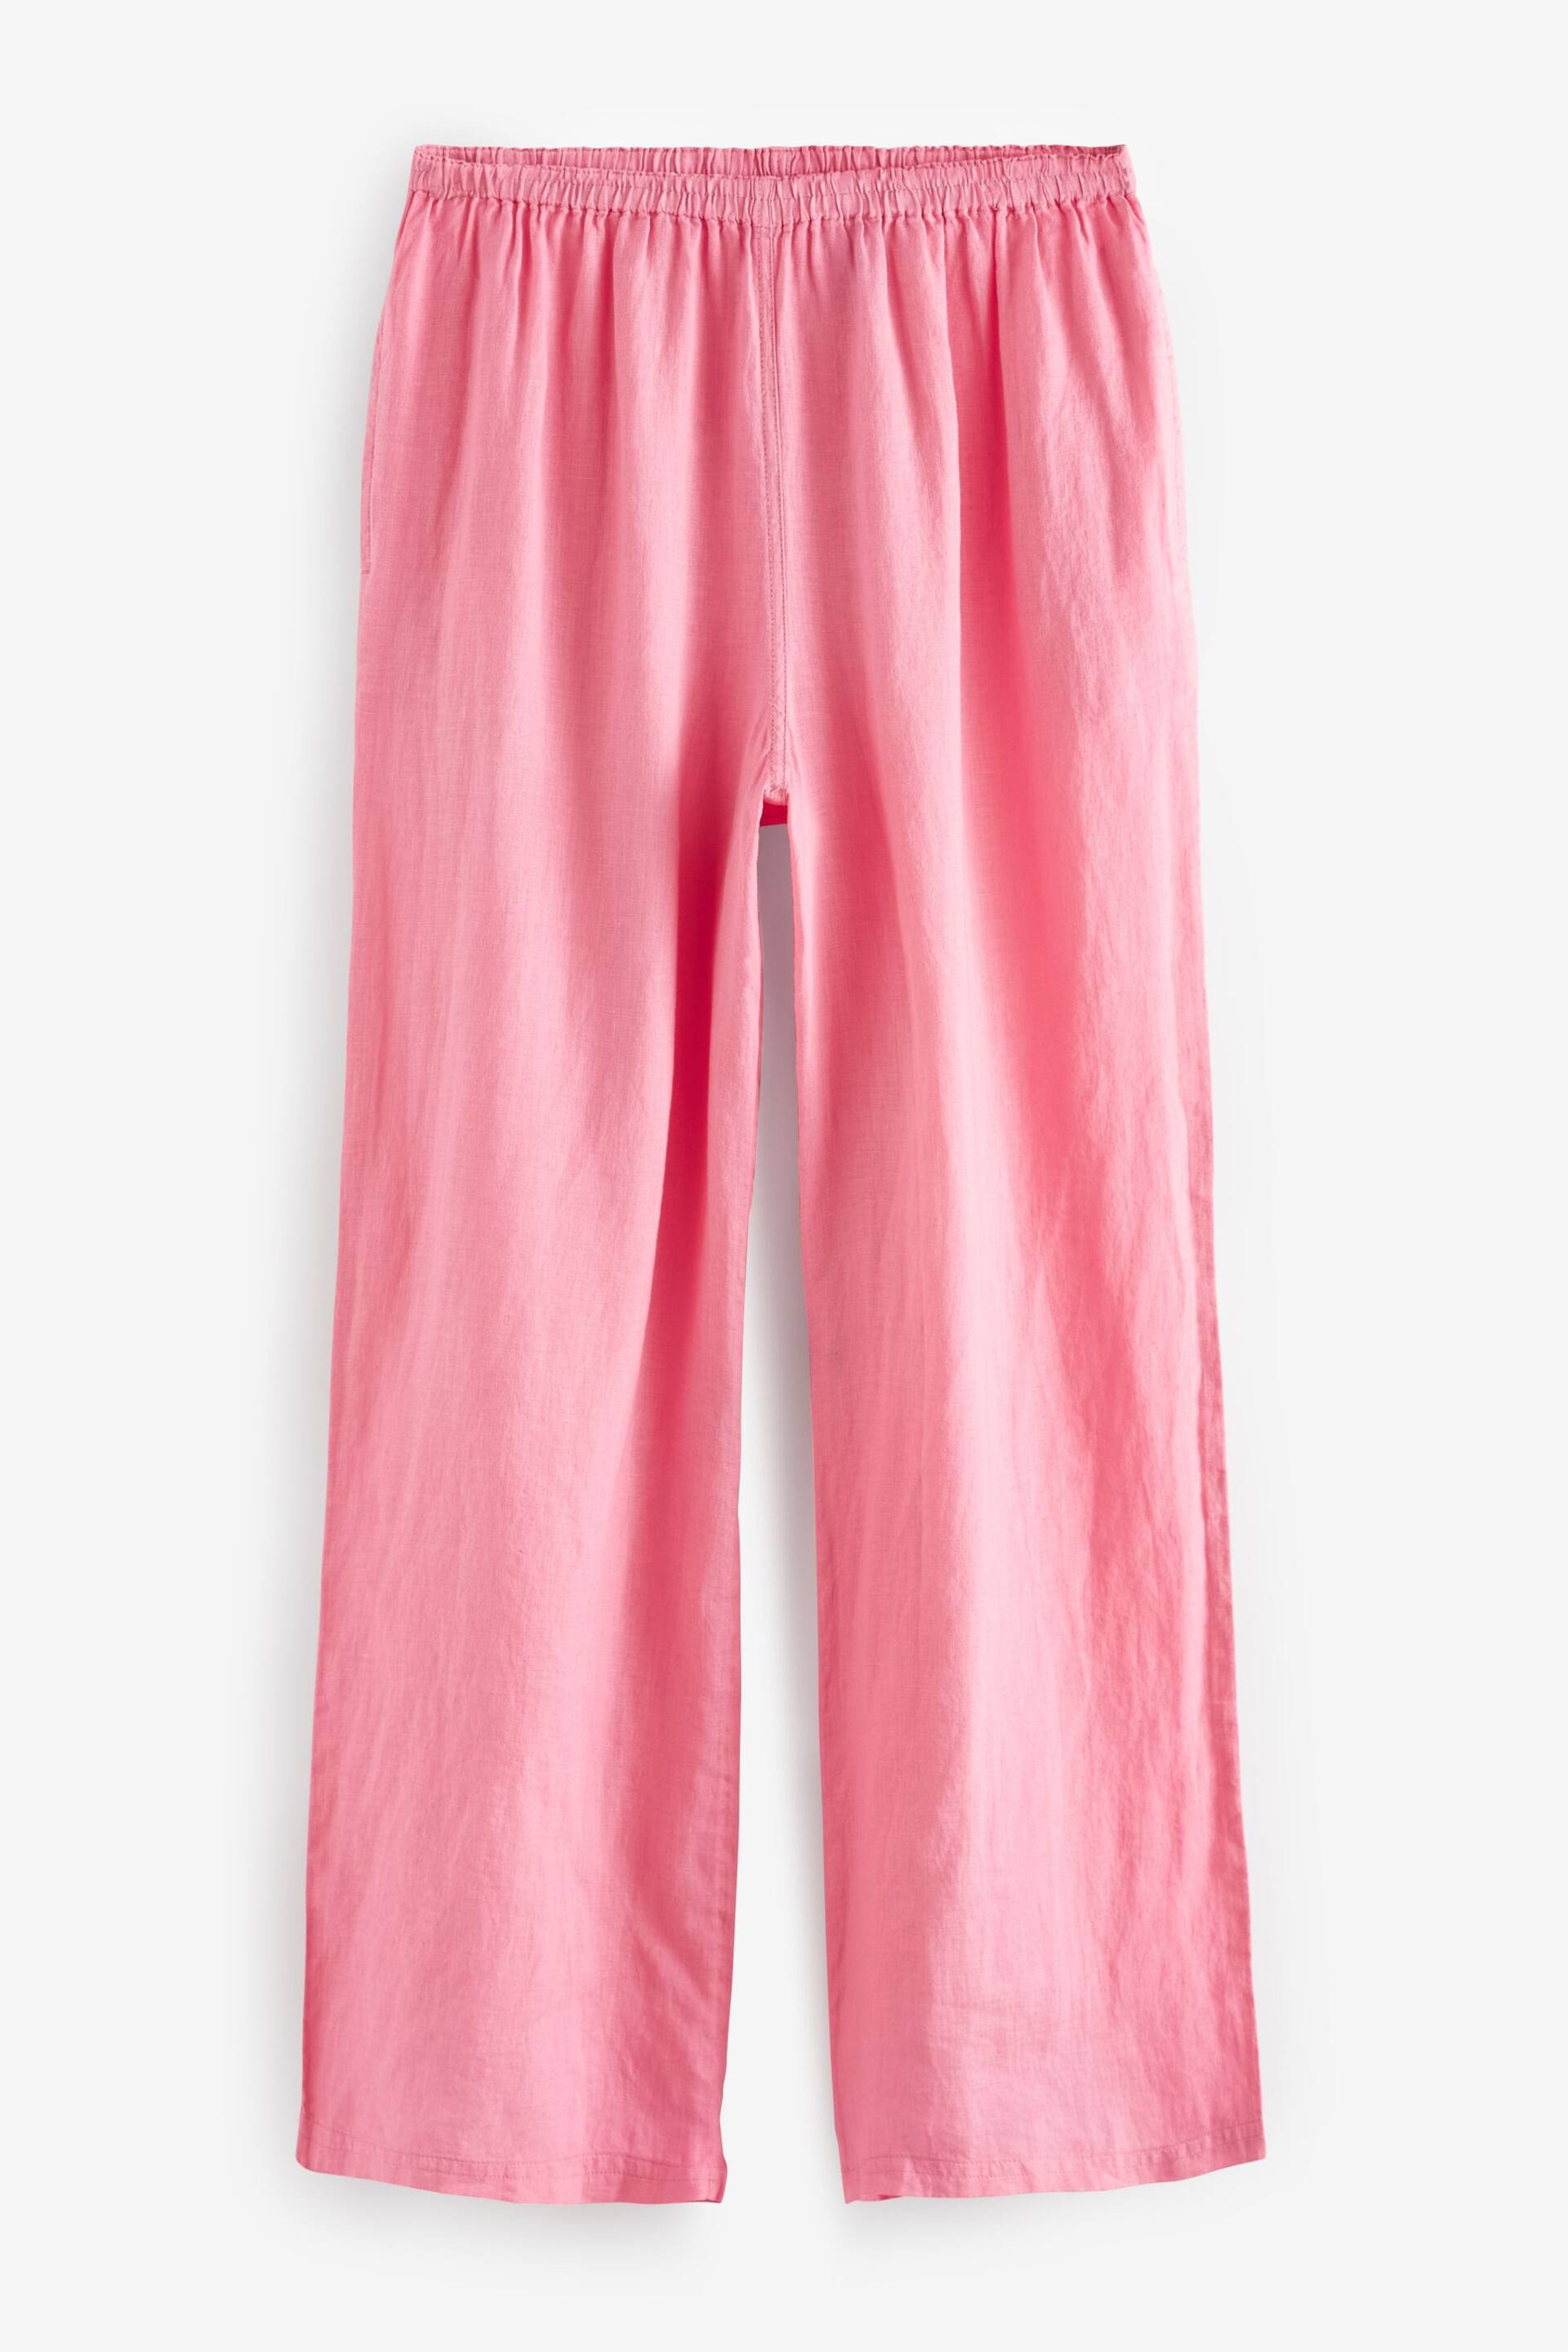 Pink Premium 100% Linen Wide Leg Trousers - Image 6 of 6